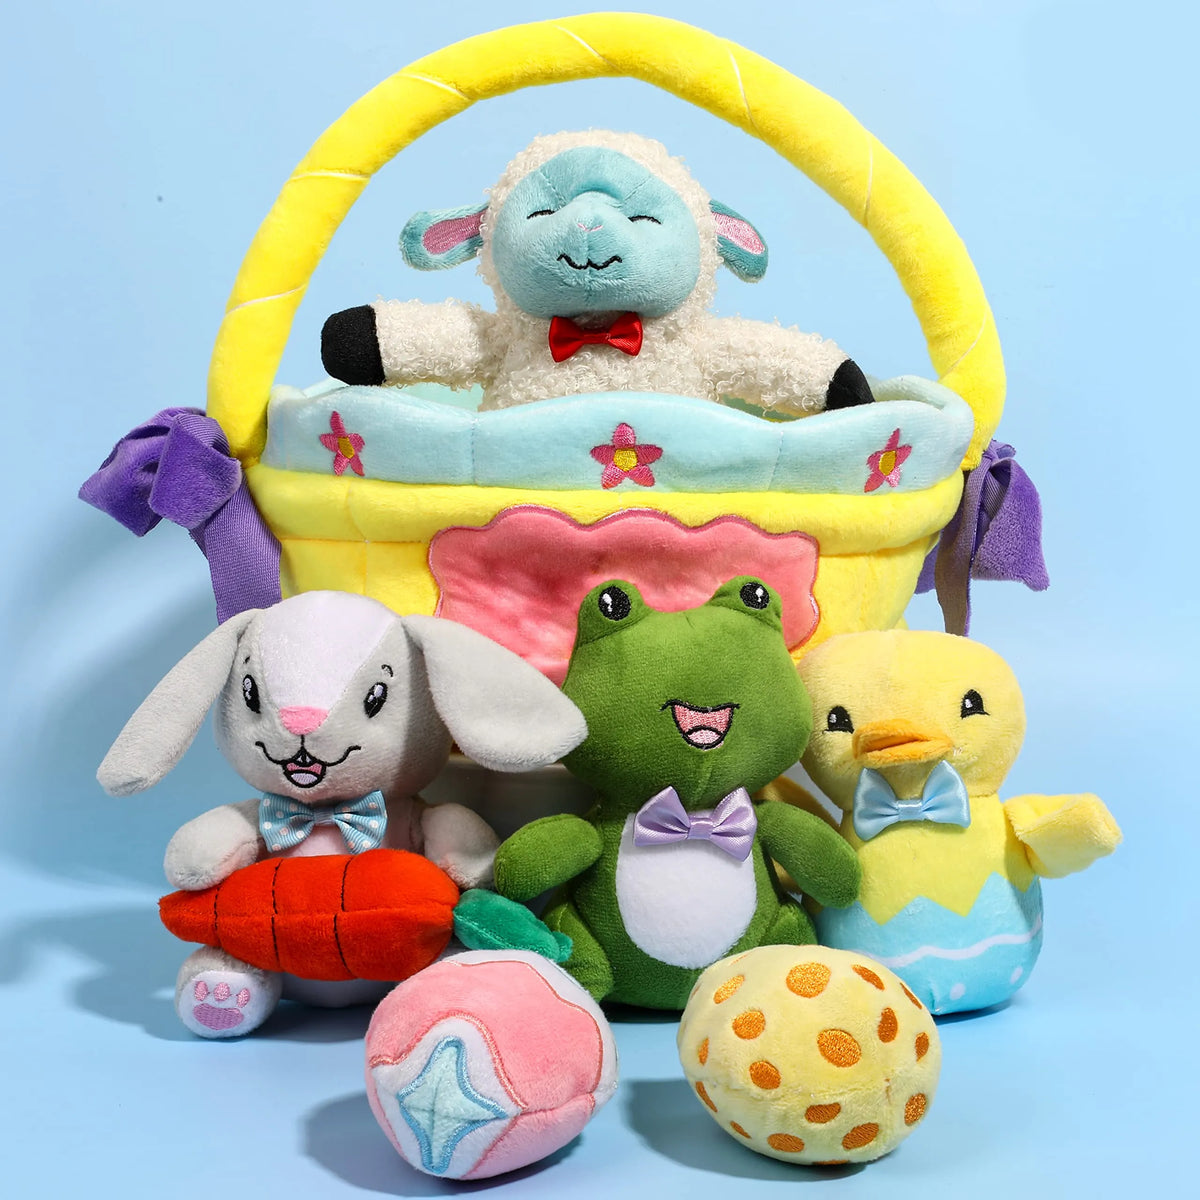 Shop for the latest 8Pcs My First Easter Basket Plush JOYIN on the web